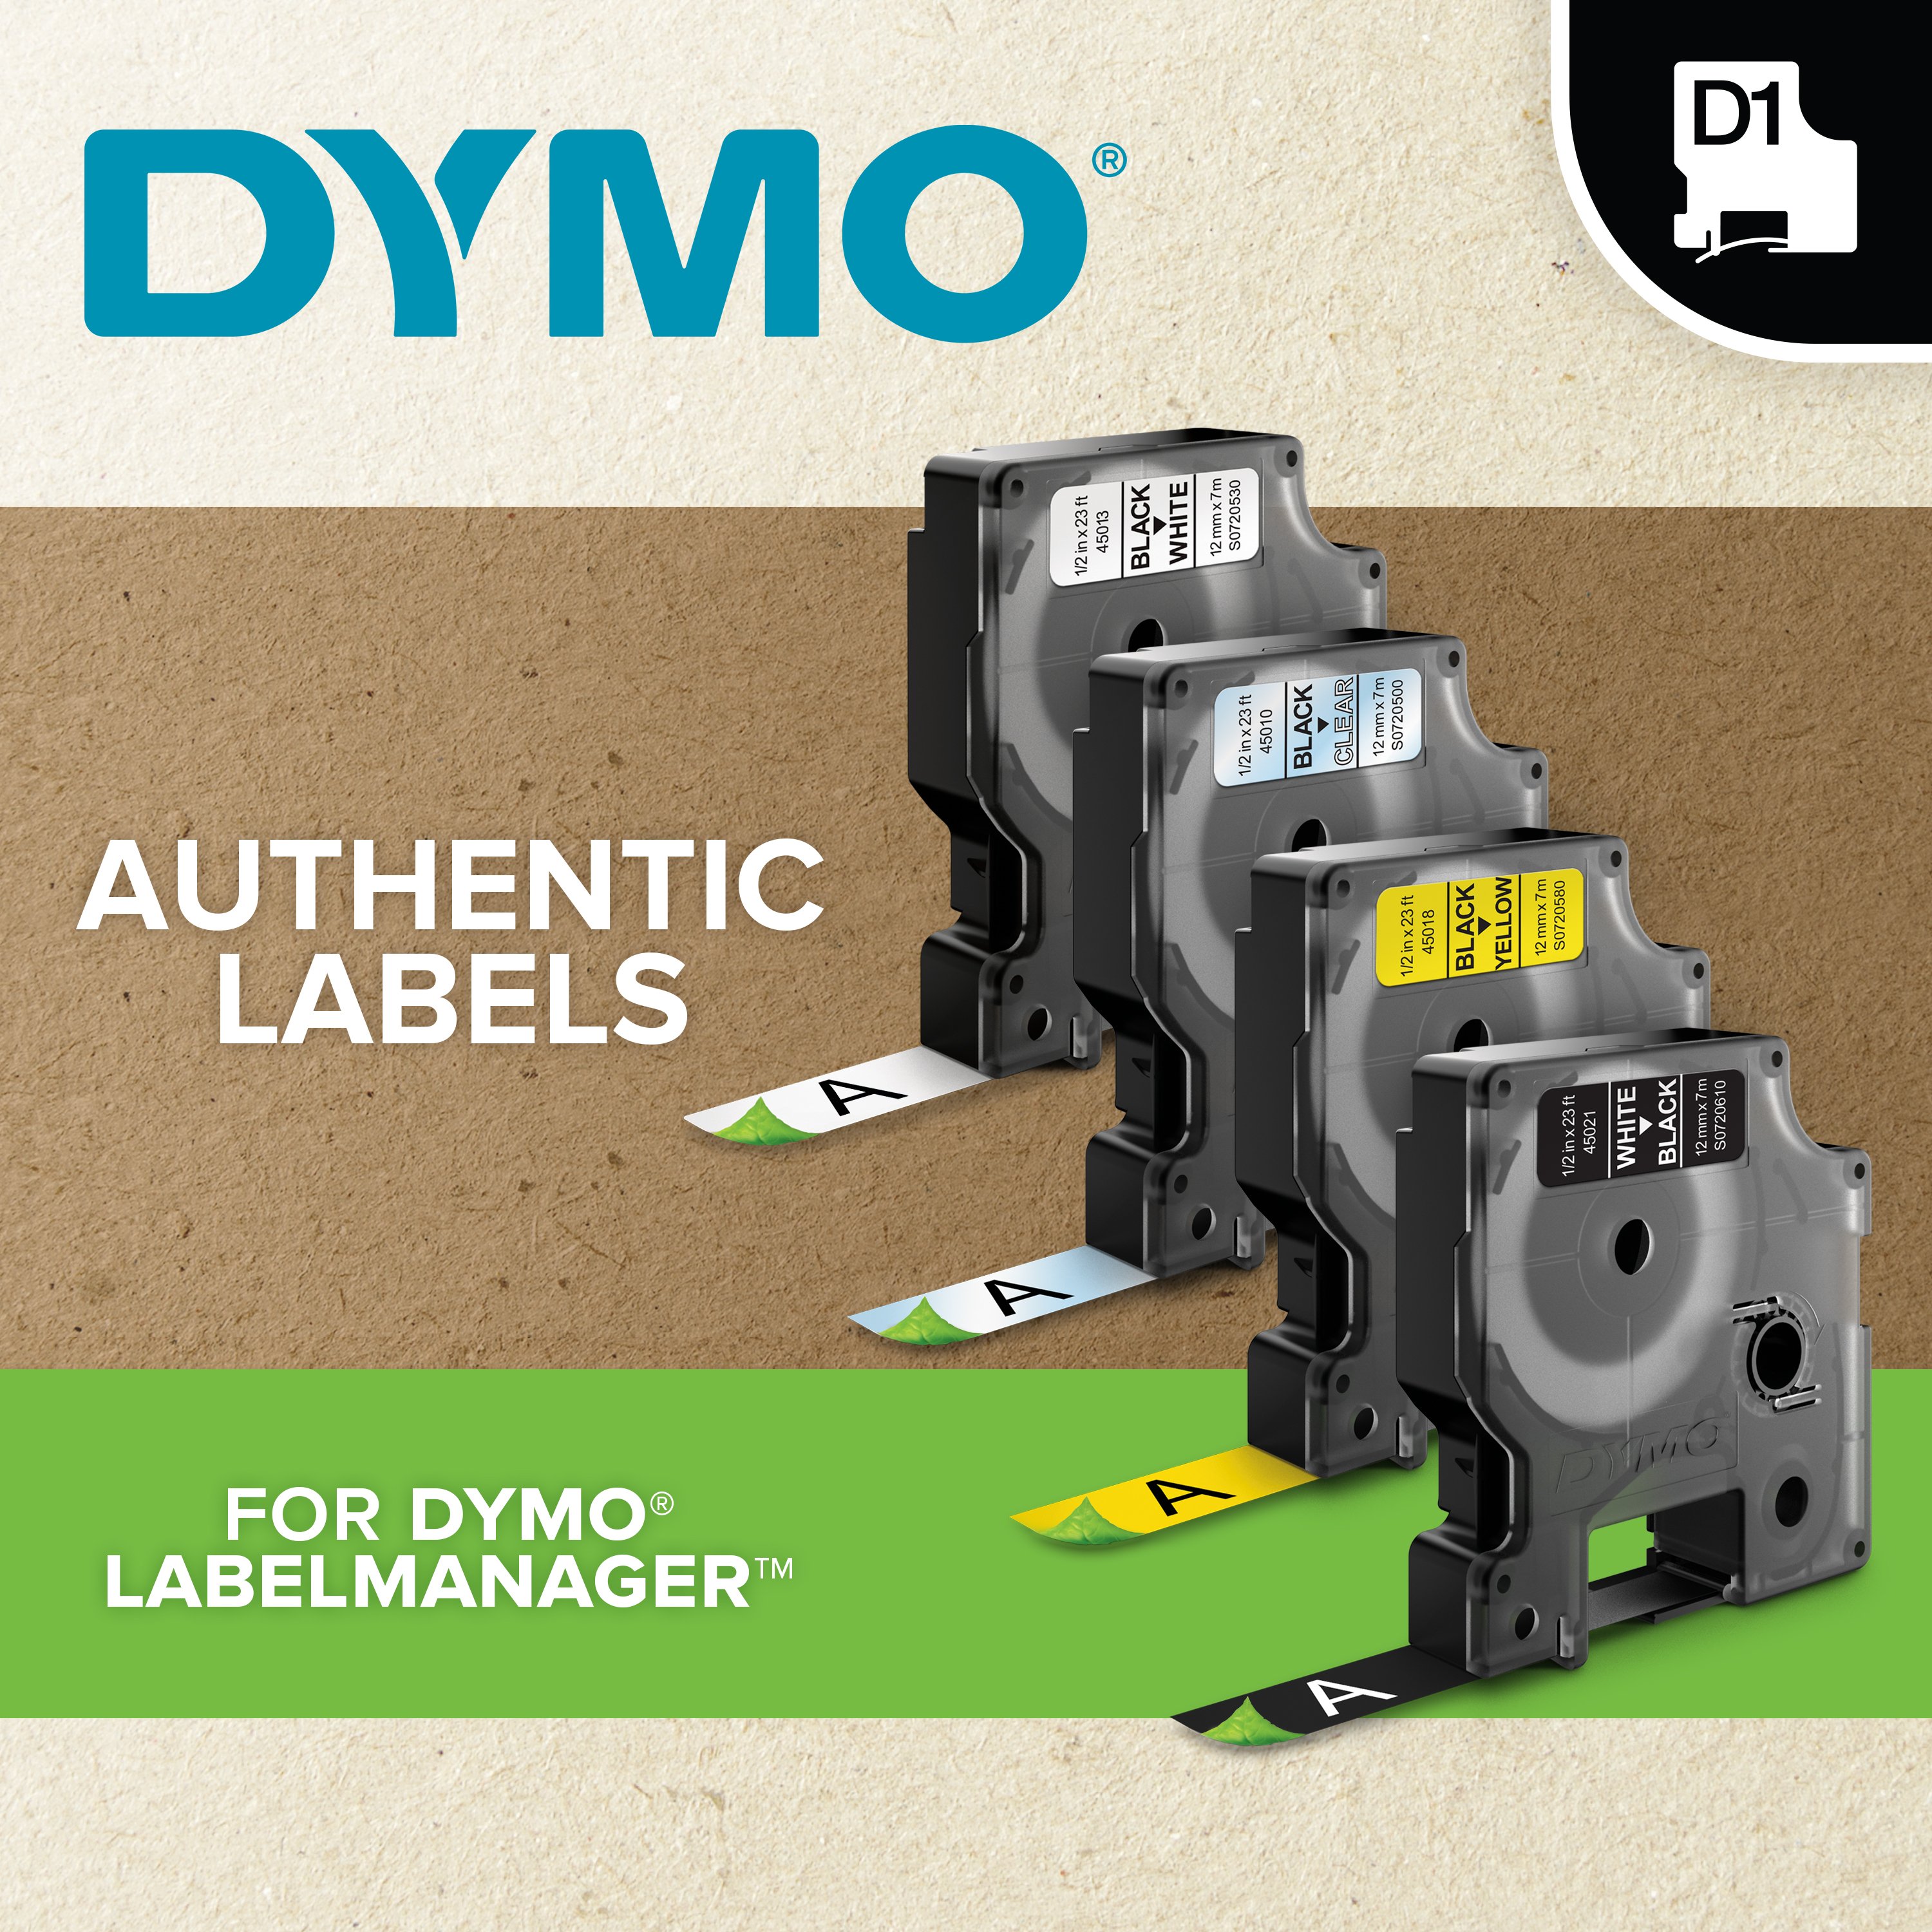 Dymo LabelManager 420P (4 stores) see the best price »